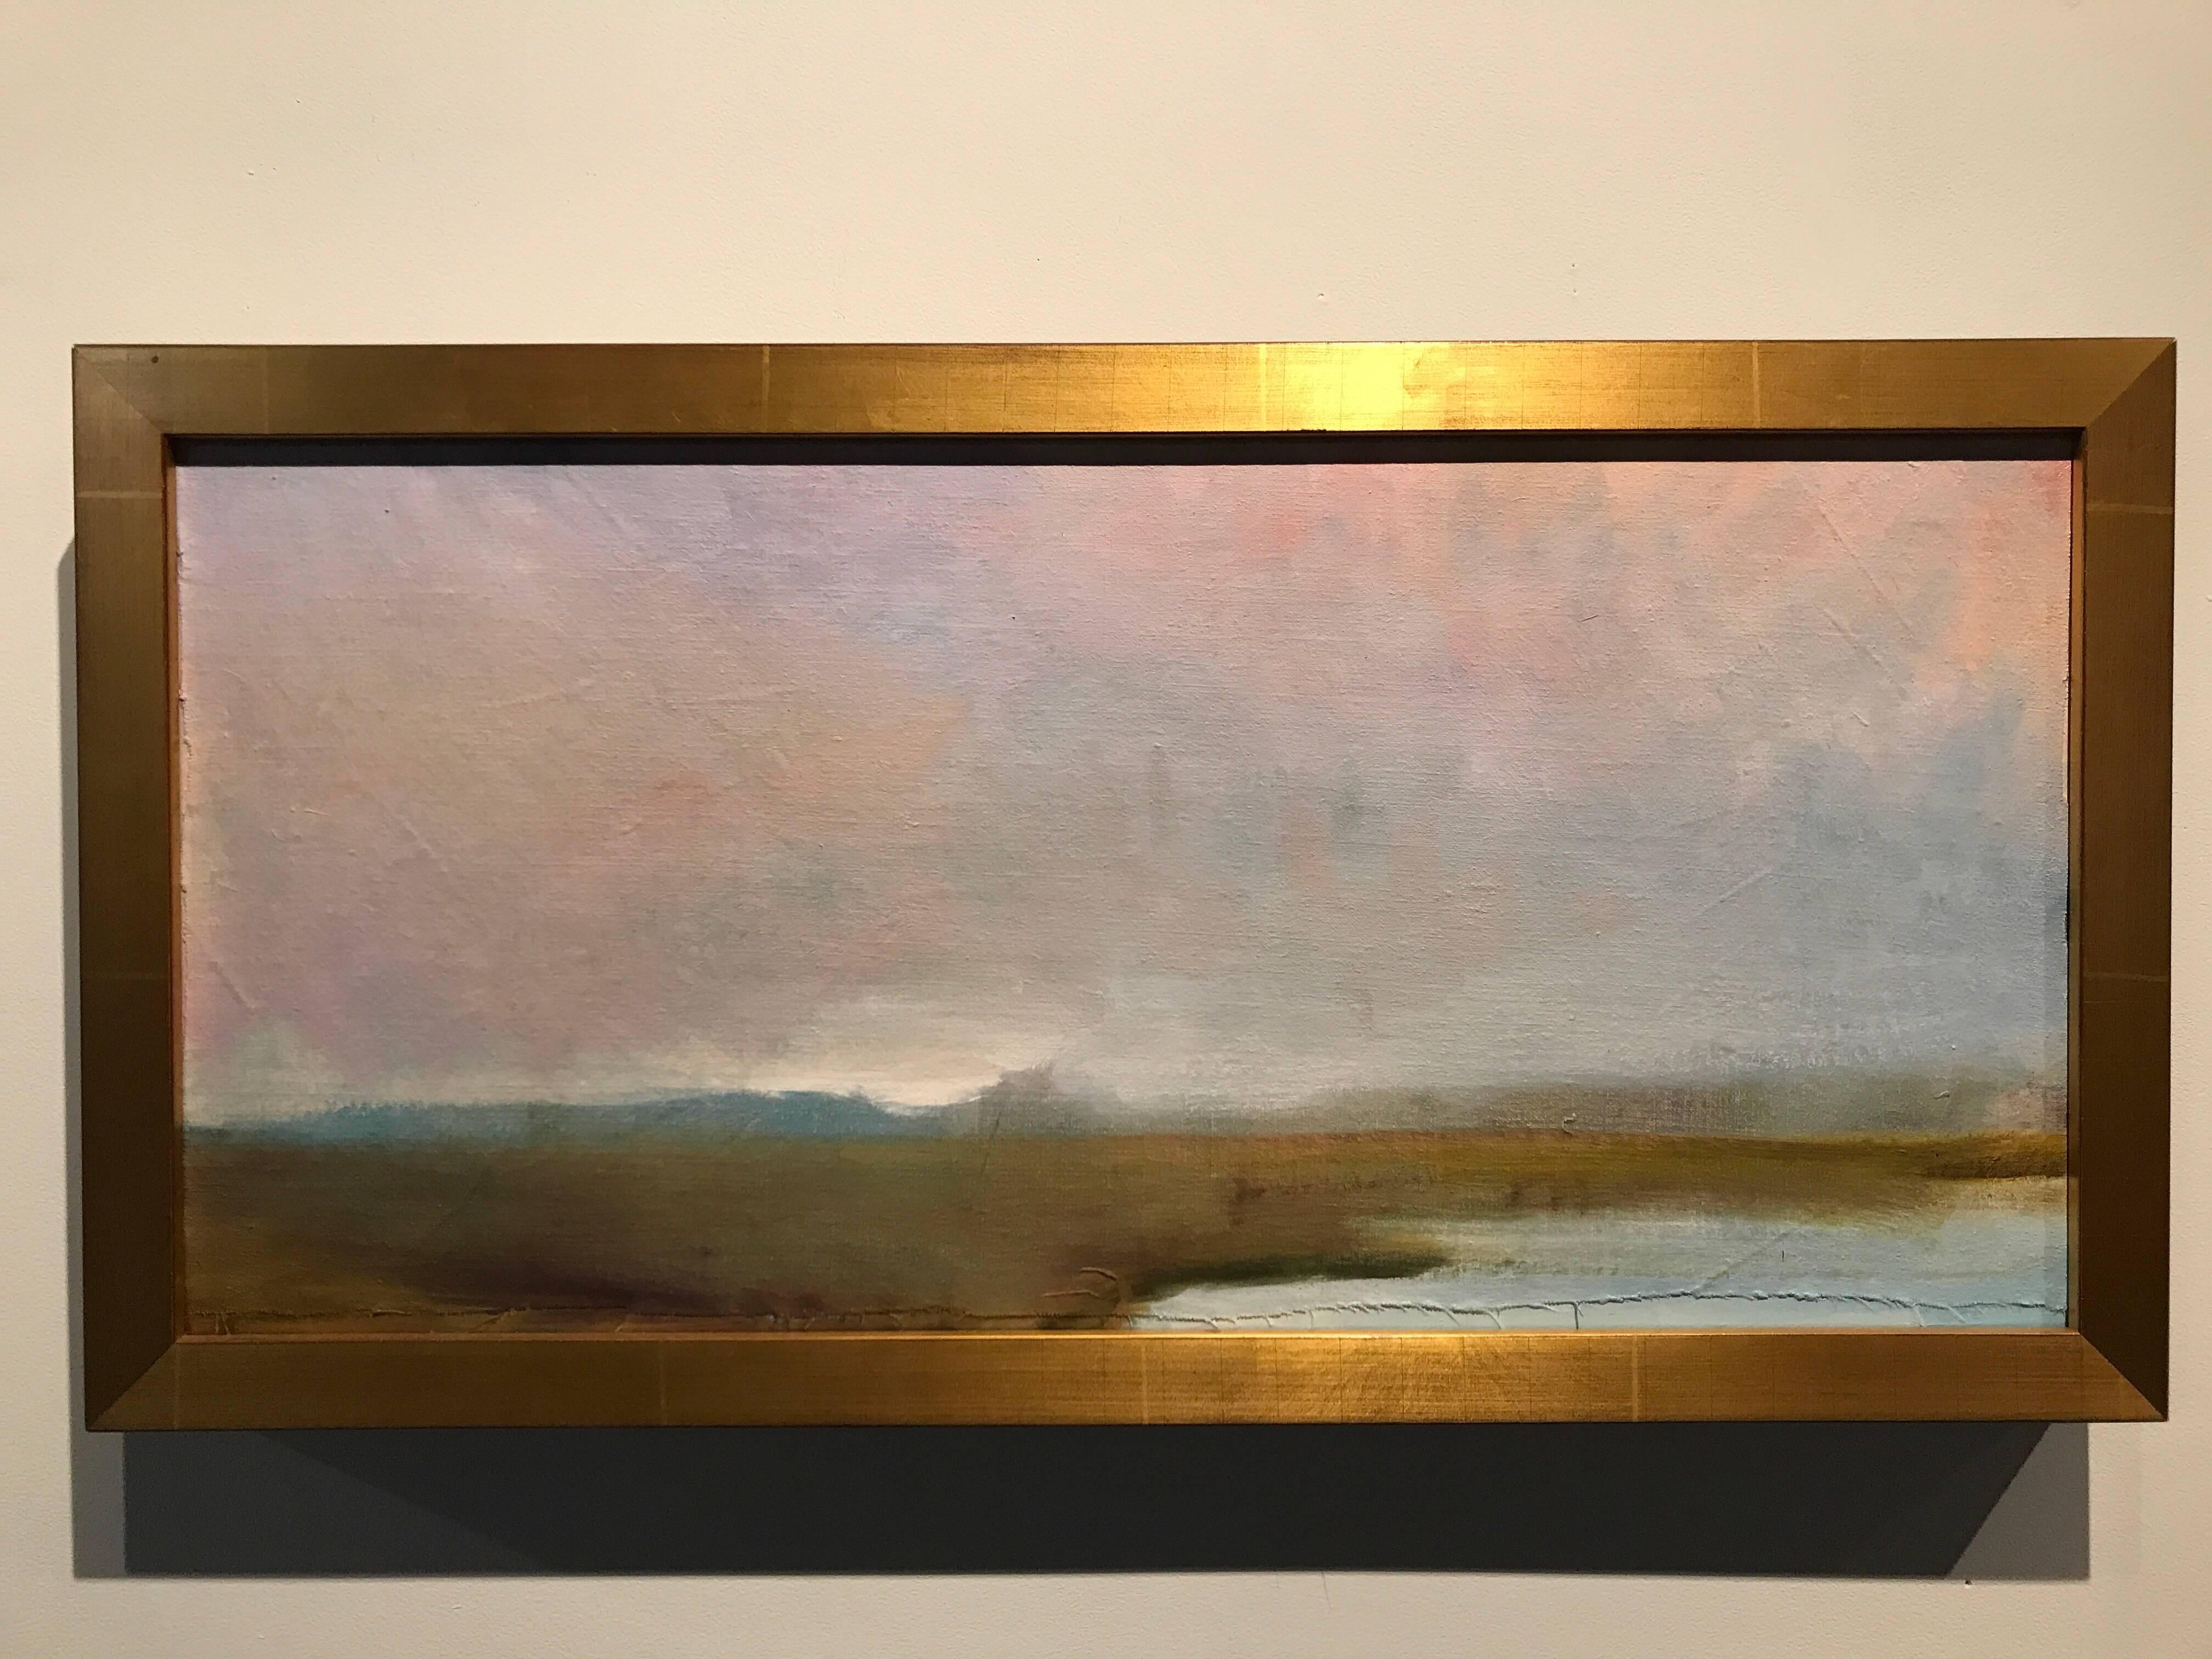 Robert Reynolds, "Hilversum", 2013, Oil on panel, 12.5" x 26"

"Hilversum" is from Reynolds' 2013 "Horizons" series. Stemming from numerous visits to the Netherlands, the "Horizons" series boasts